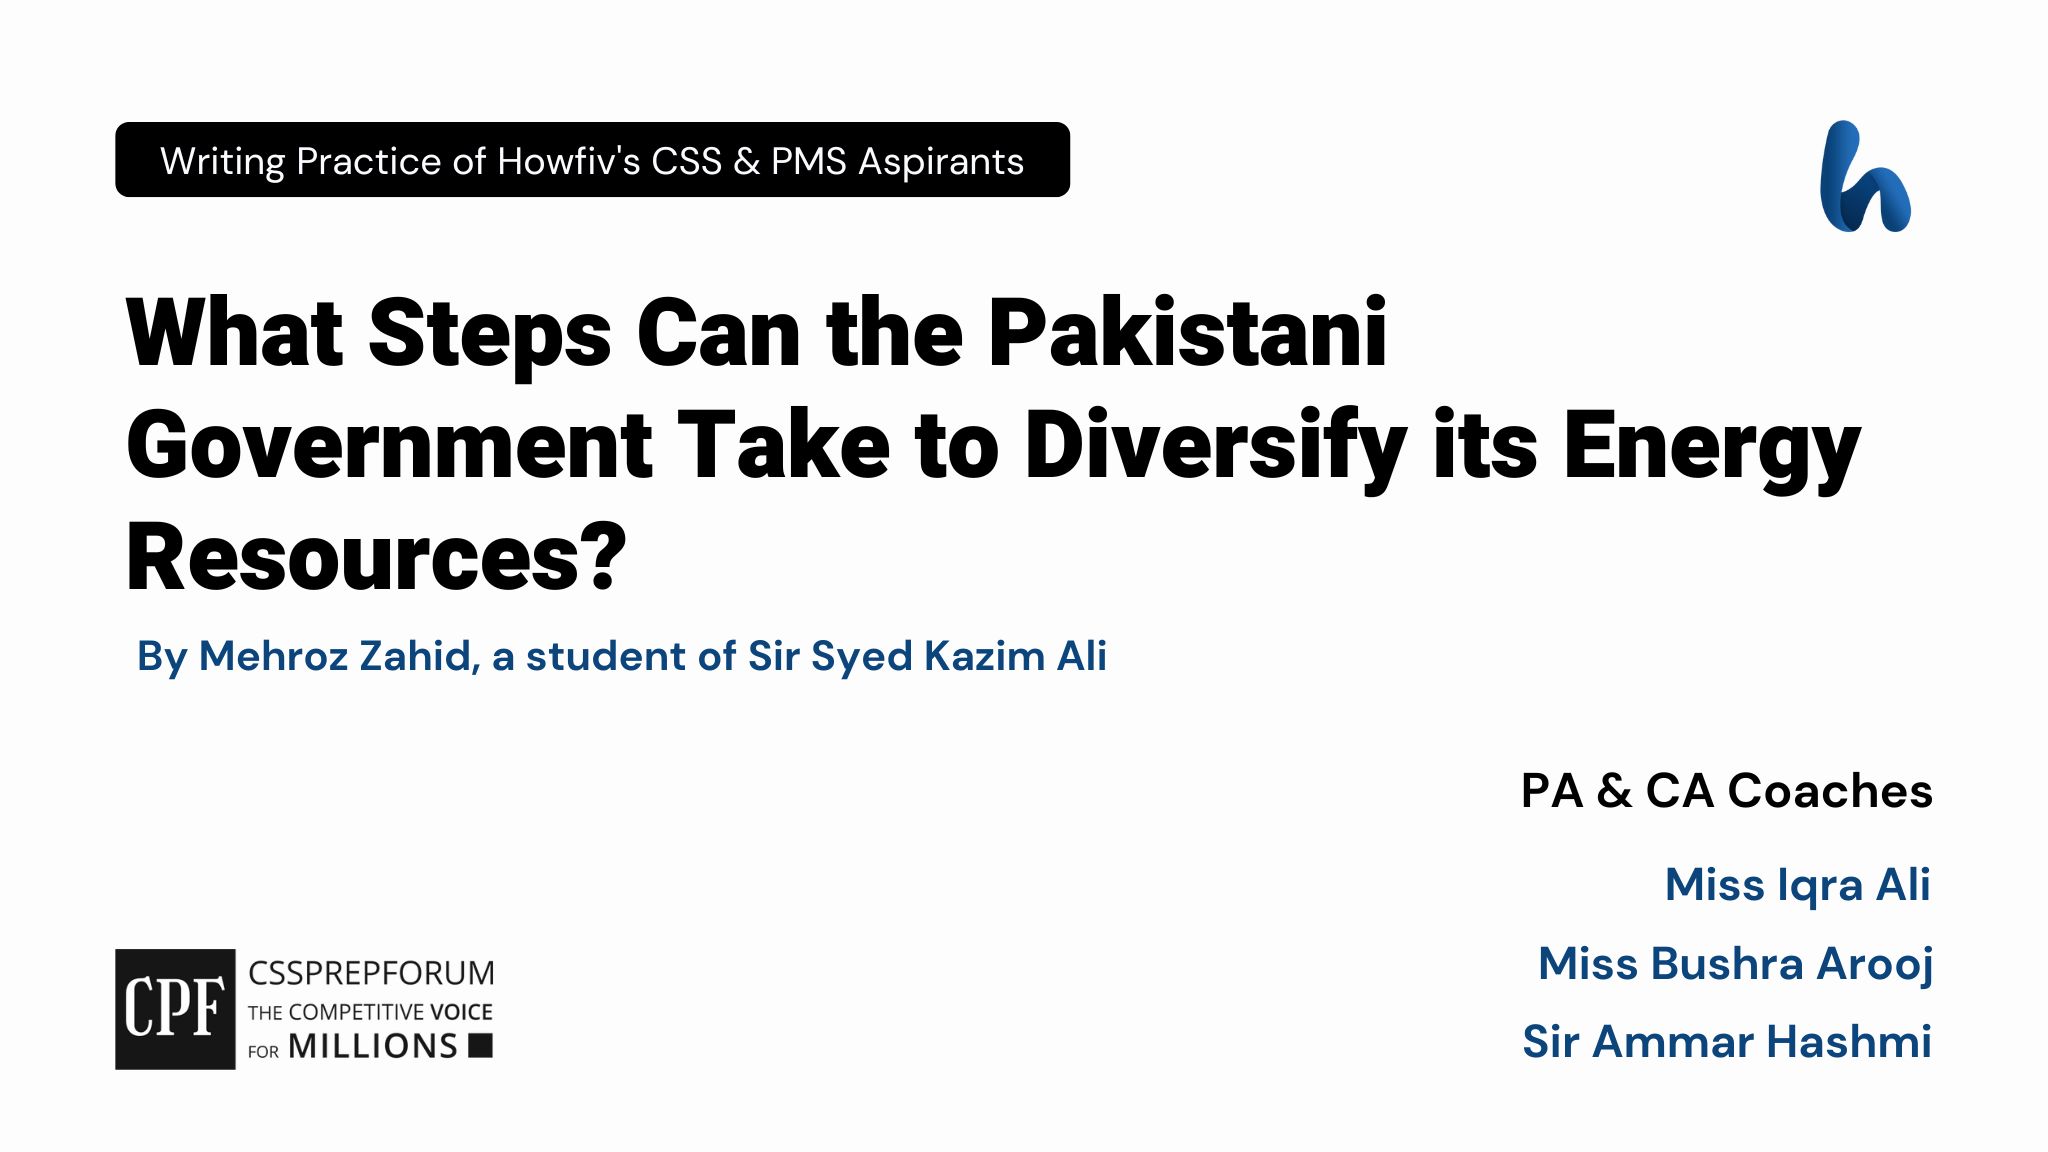 CSS Current Affairs article | Steps to Diversify its Energy Resources | is written by Mehriz Zahid under the supervision of Sir Ammar Hashmi...